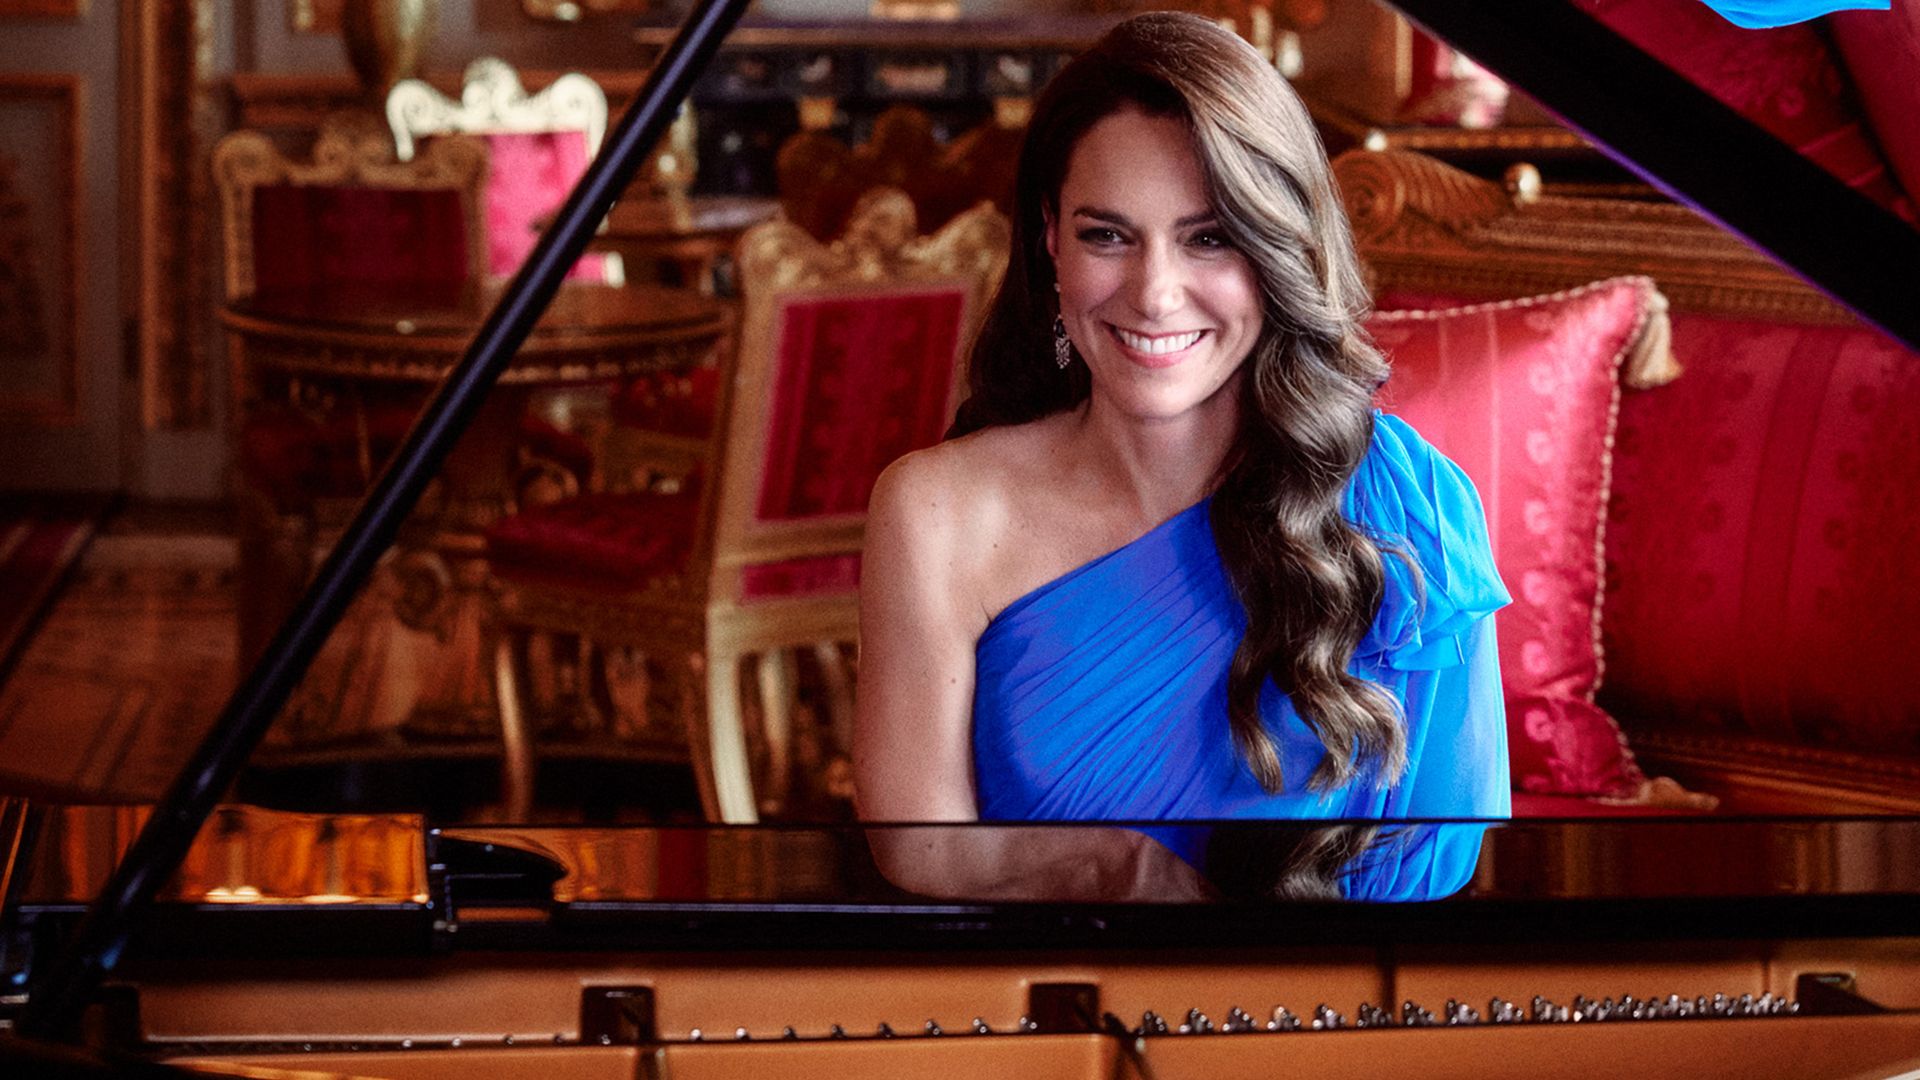 Kate Middleton showcases incredible piano skills in unexpected